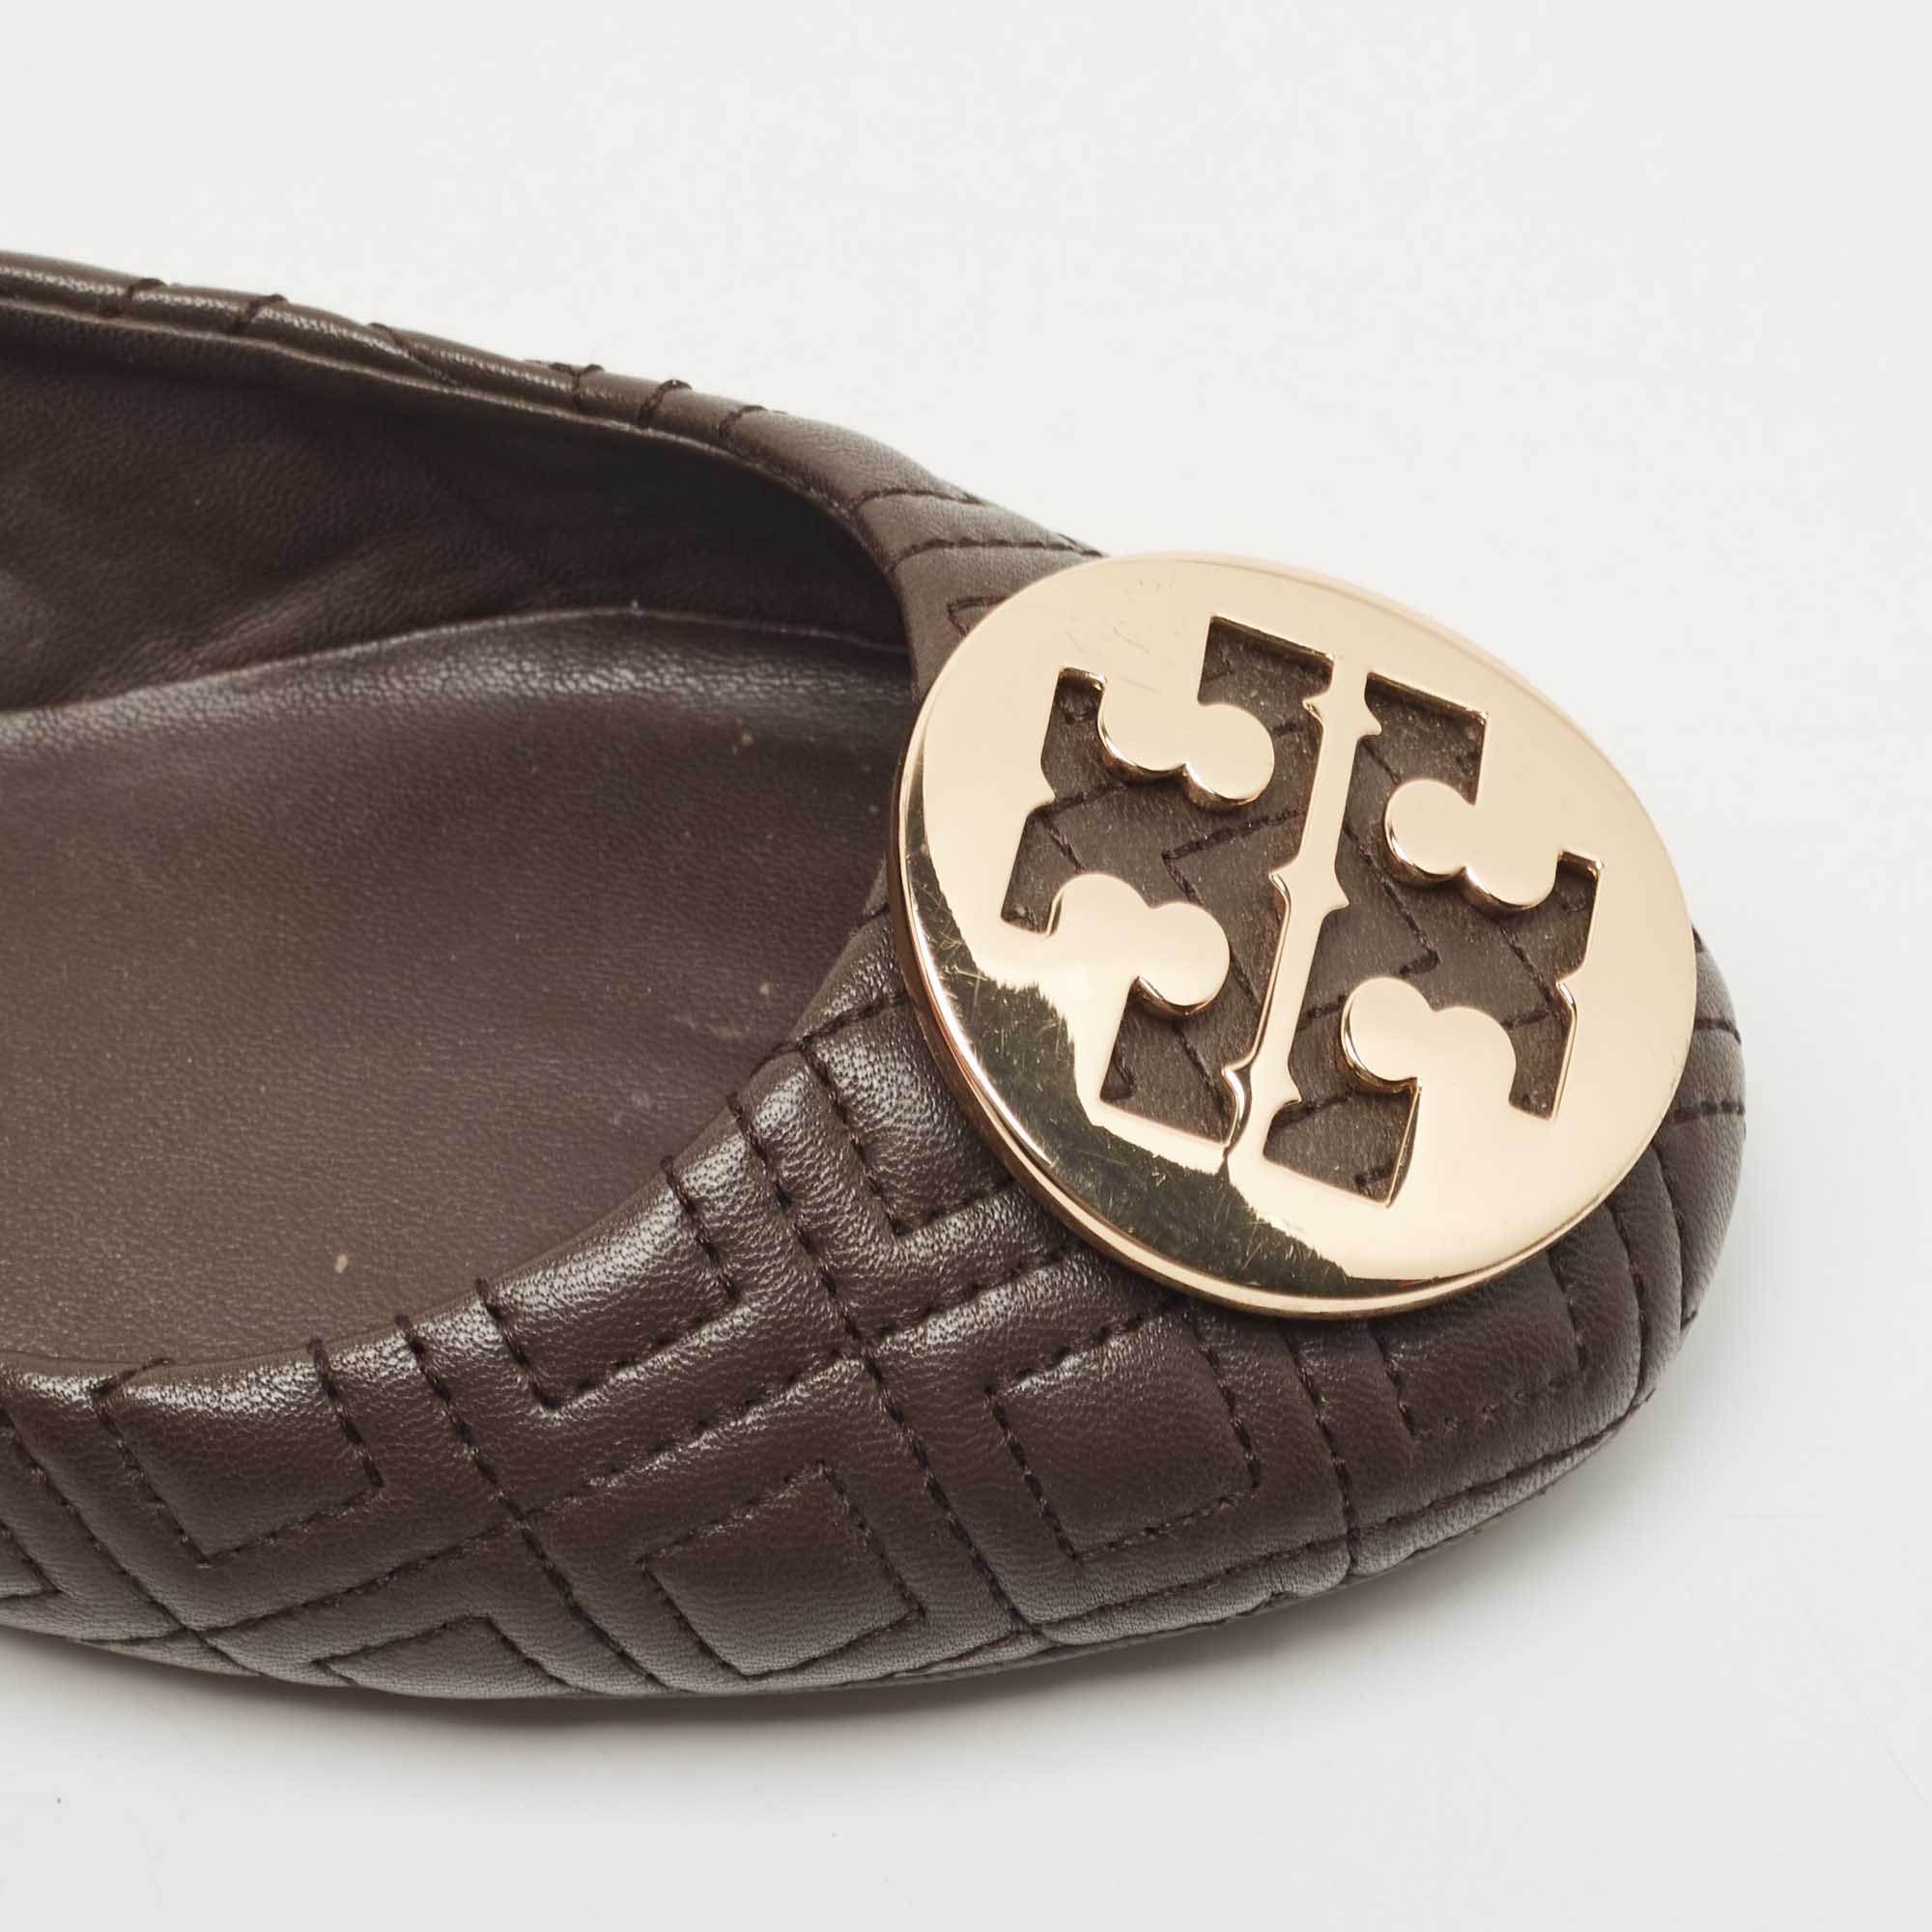 Tory Burch Brown Leather Scrunch Ballet Flats Size 35.5